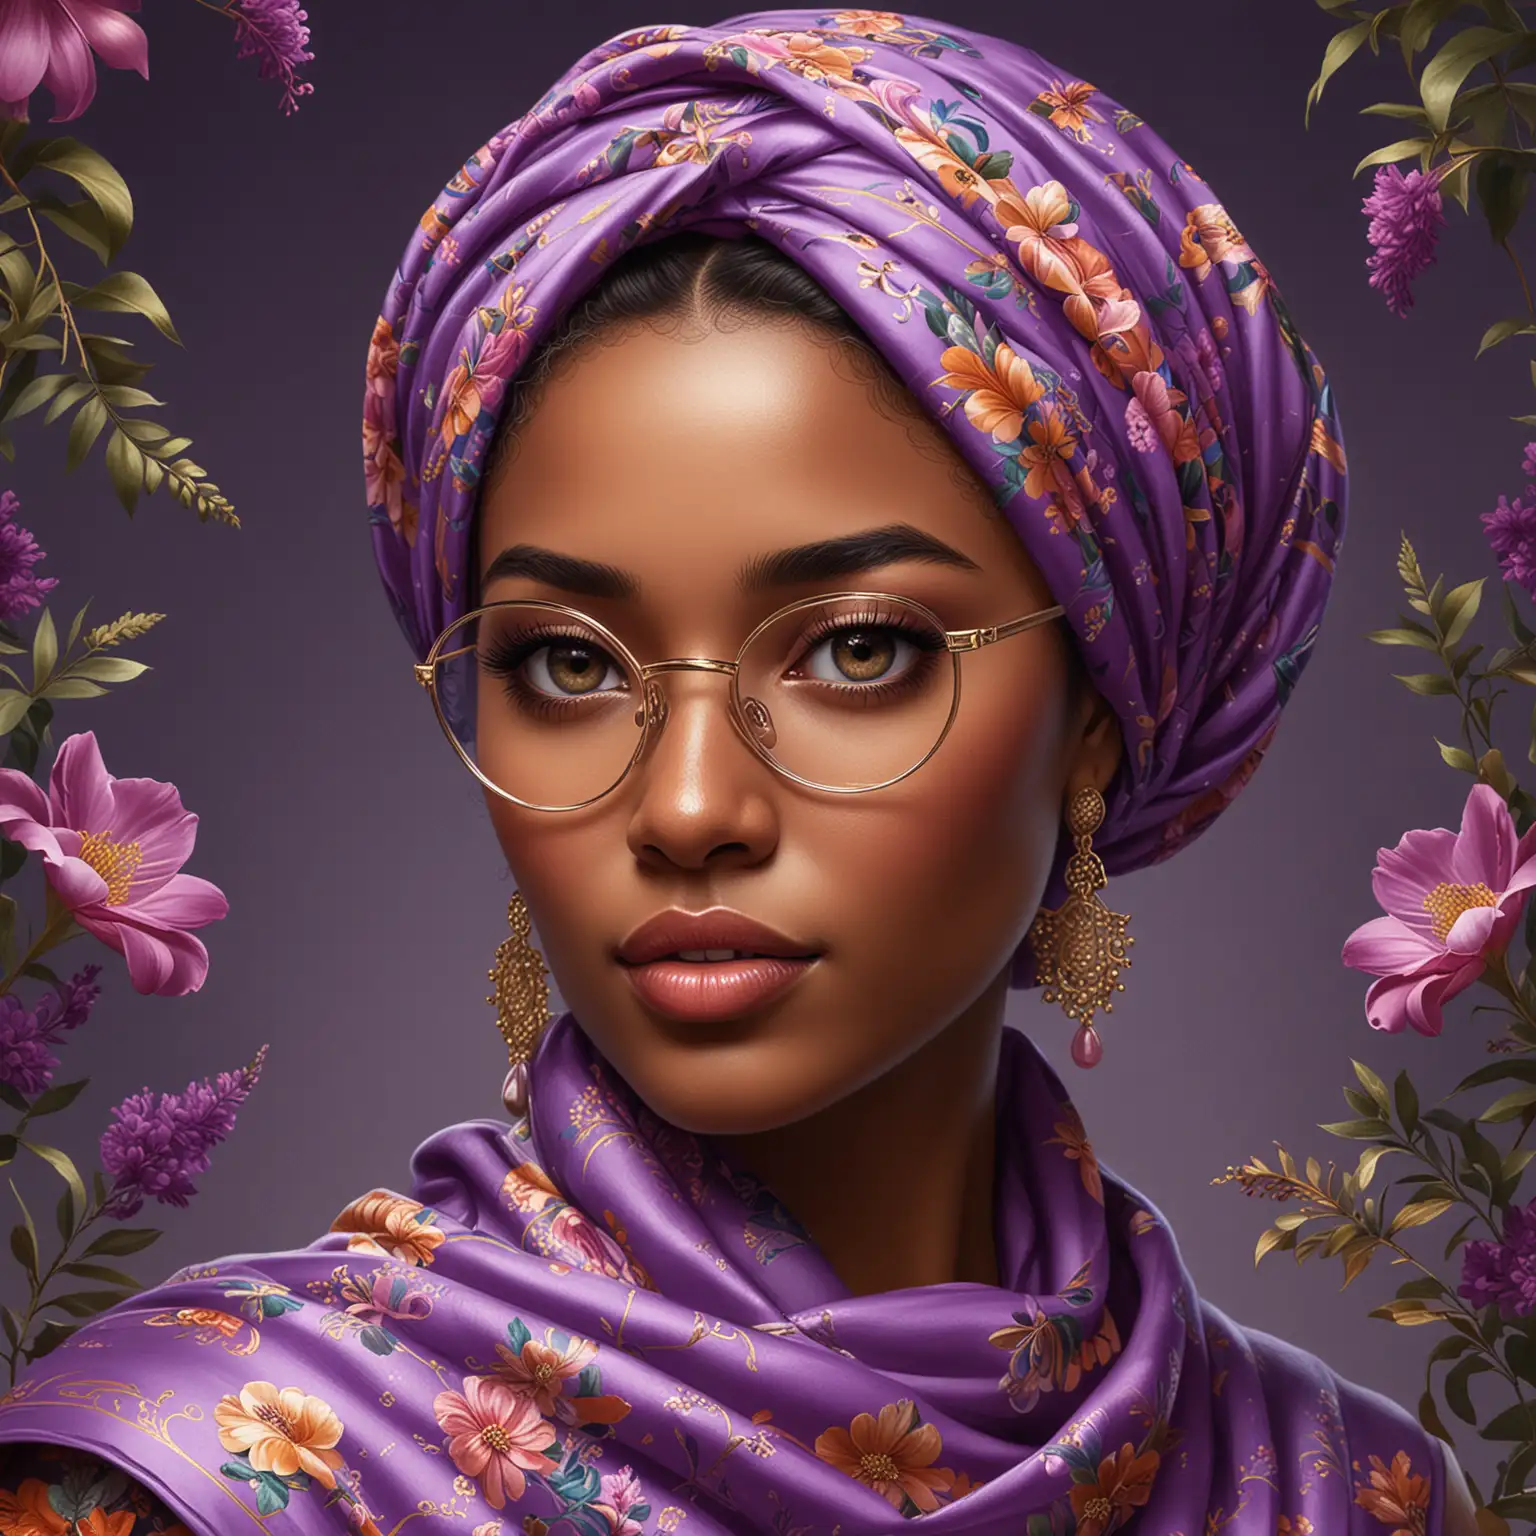 Illustrate a digital art portrait of a female character with a rich ebony complexion that exhudes sophistication and artistry. She should have prominent, striking eyes with long, dramatic eyelashes, and she should be wearing elegant round glasses with a gold frame. Her hair shoul be styled in a vibrant headscarf lavishly adorned with colouful and elaborate floral patterns, including large purple blooms. The character should be neutral and simple to ensure the focus remains on the character, and there should be no text included in the image. The image should have the aesthetic of an art prompt guide cover, embodying a blend of modern and classical elegance.